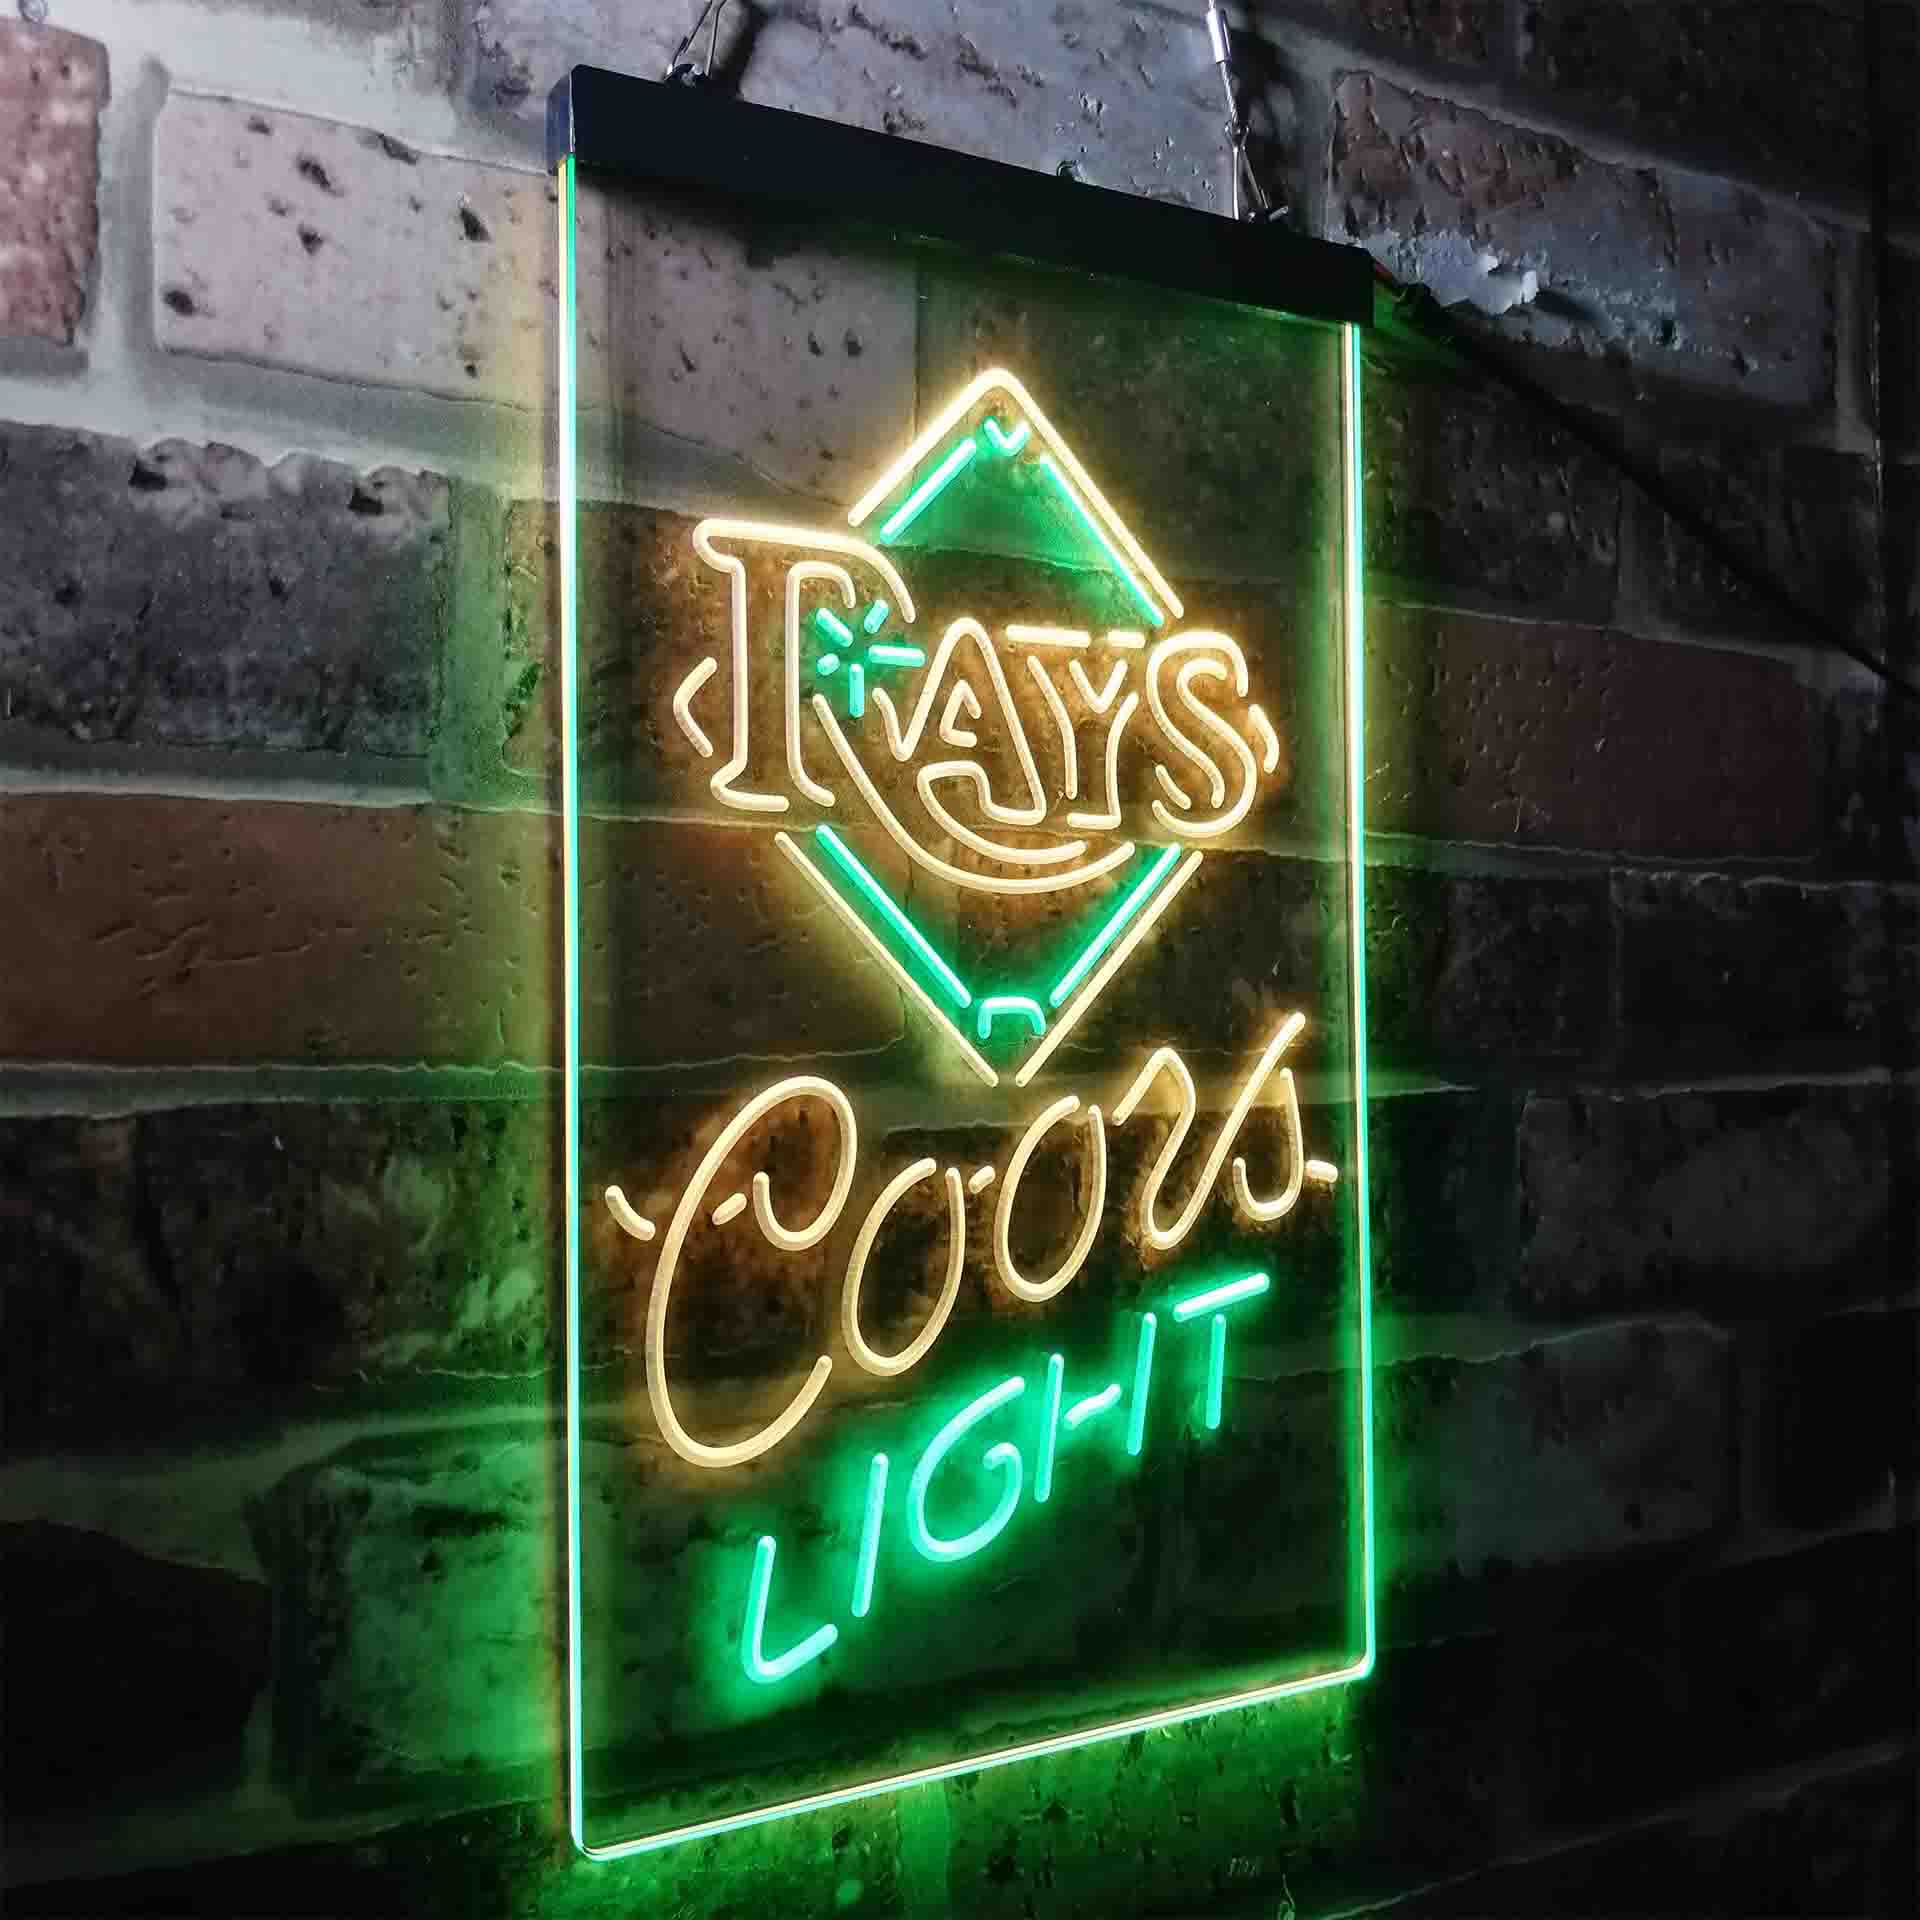 Tampa Bay Rays Coors Light Neon-Like LED Sign